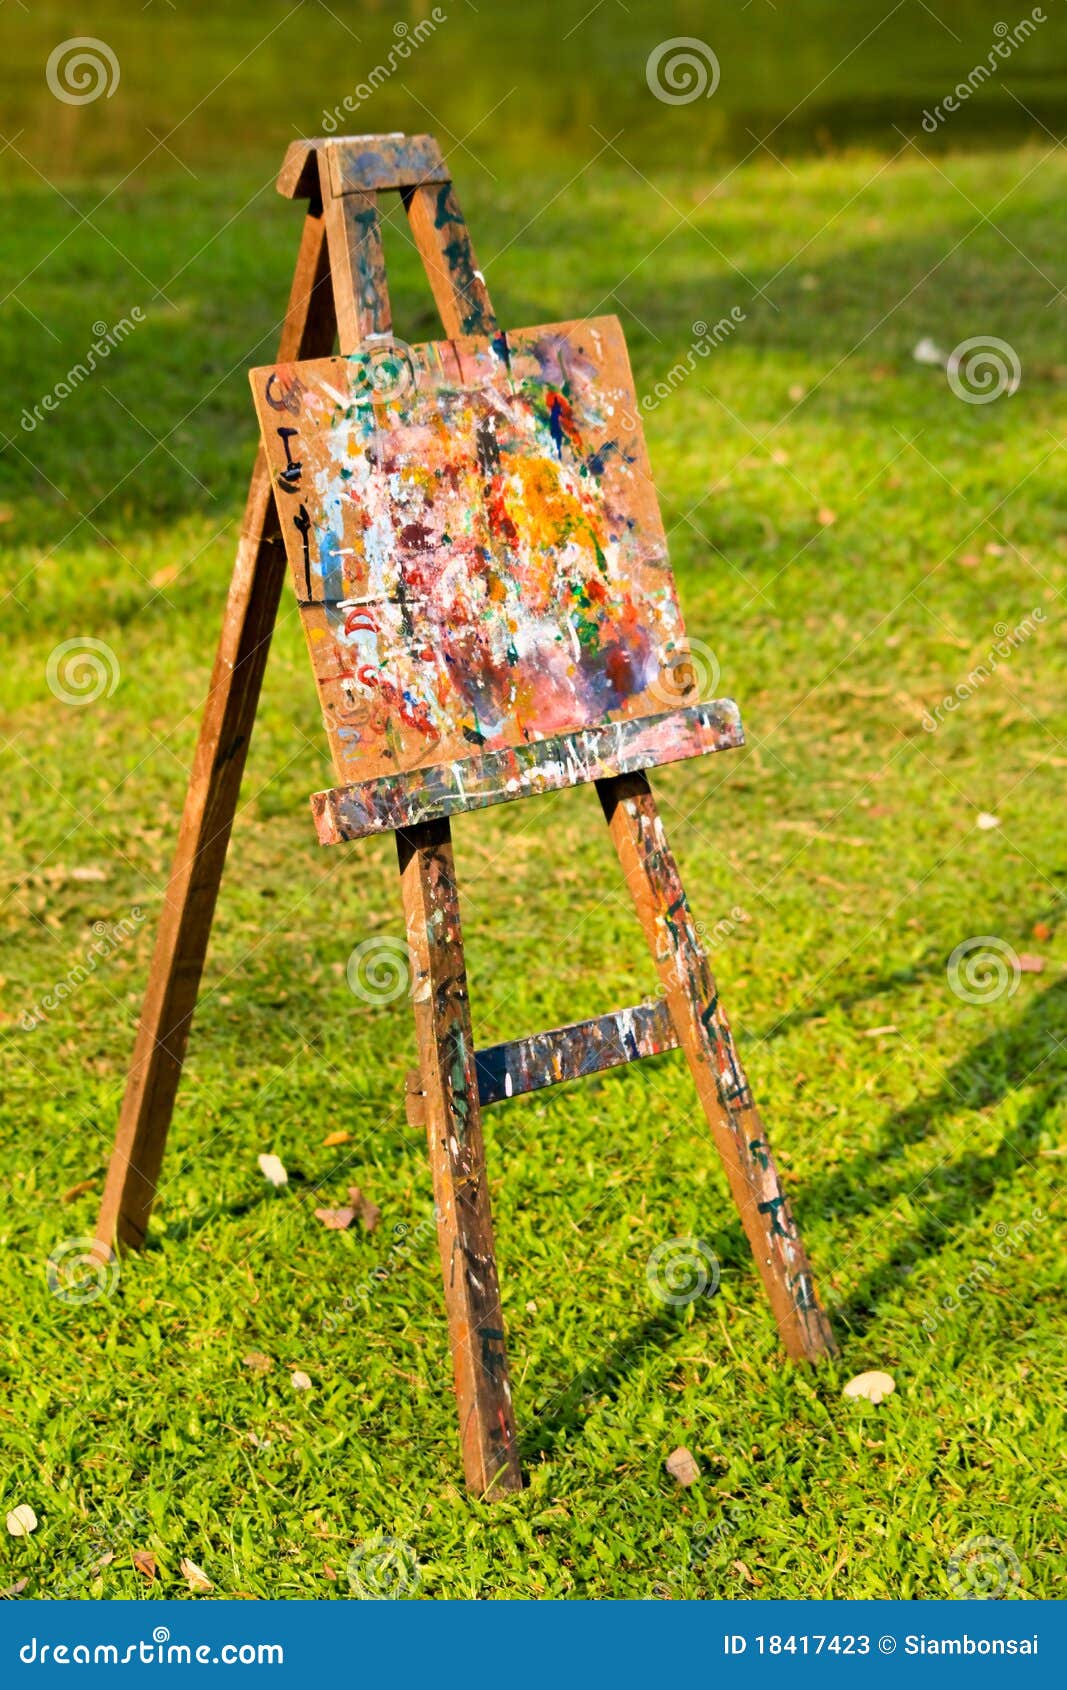 Painting board stock image. Image of drawing, brush, water - 18417423